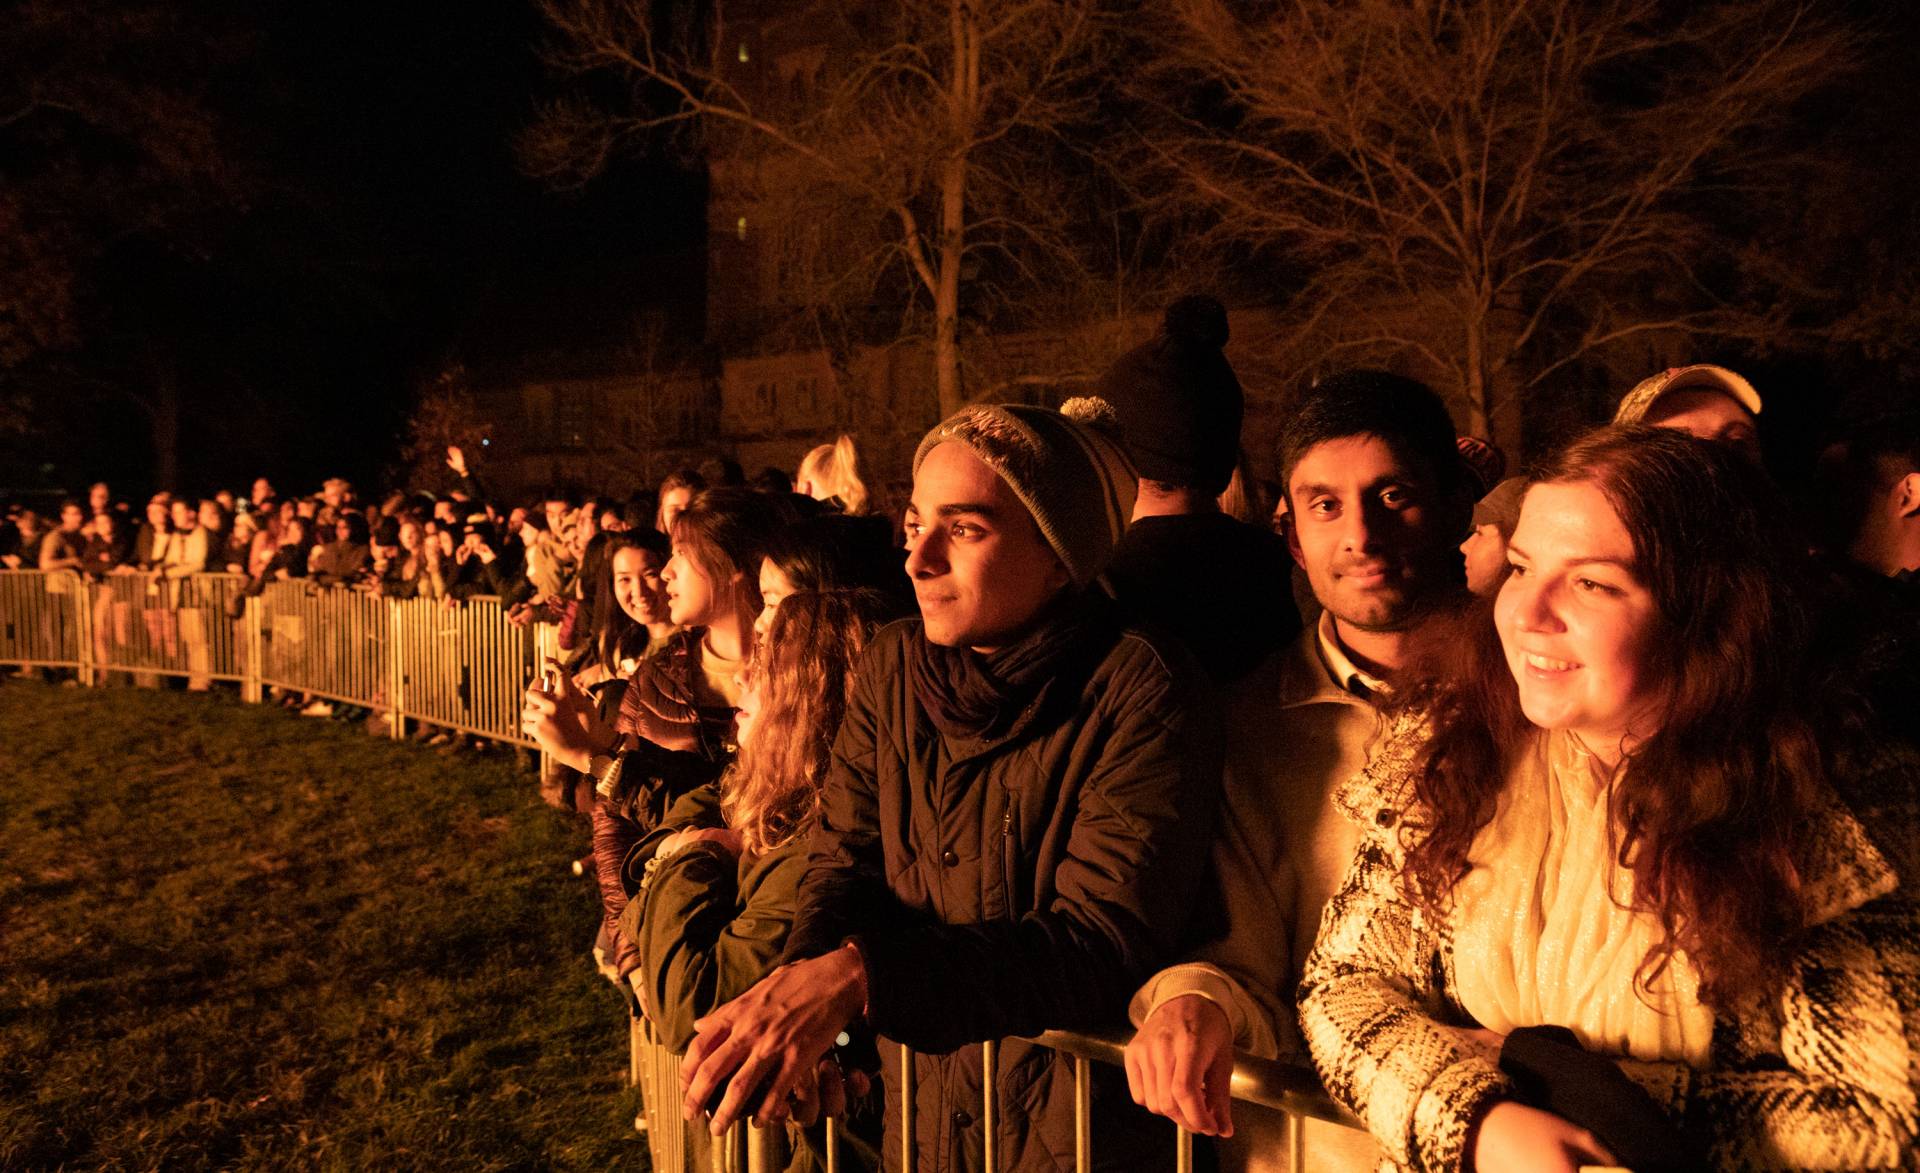 Students looking on at the bonfire